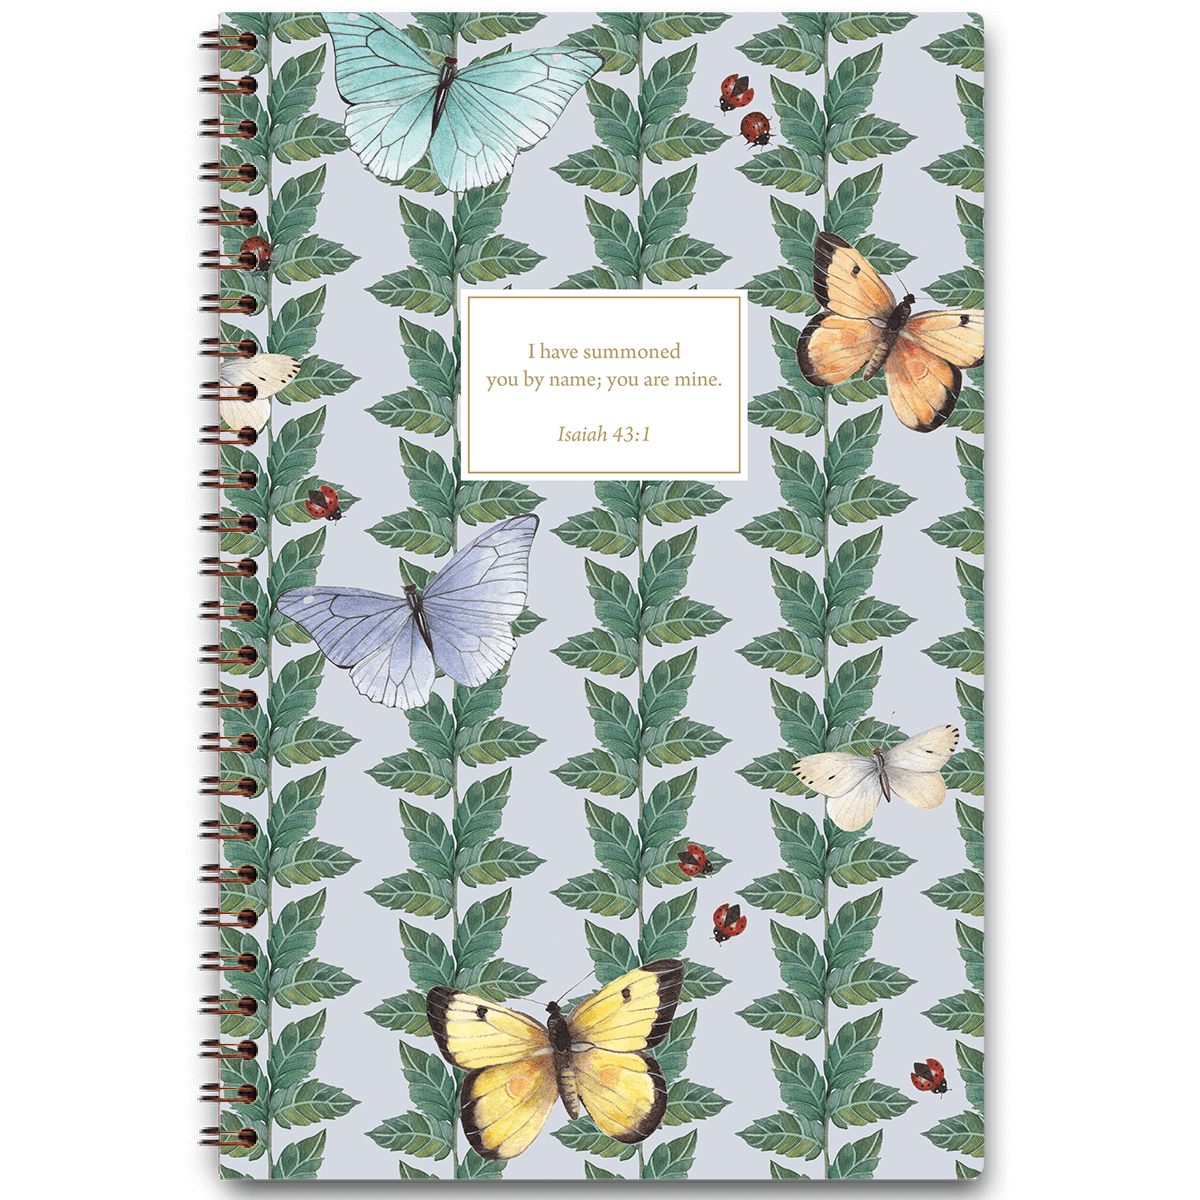 butterfly journal, lydia carraway design, lydia carraway artist, christian journal, christian journal for women, christian gifts, personalized devotional, christian book store, prayer journal, christian gratitude journal, best christian gifts, personalized scripture, christian wedding gifts, christian mothers day gifts